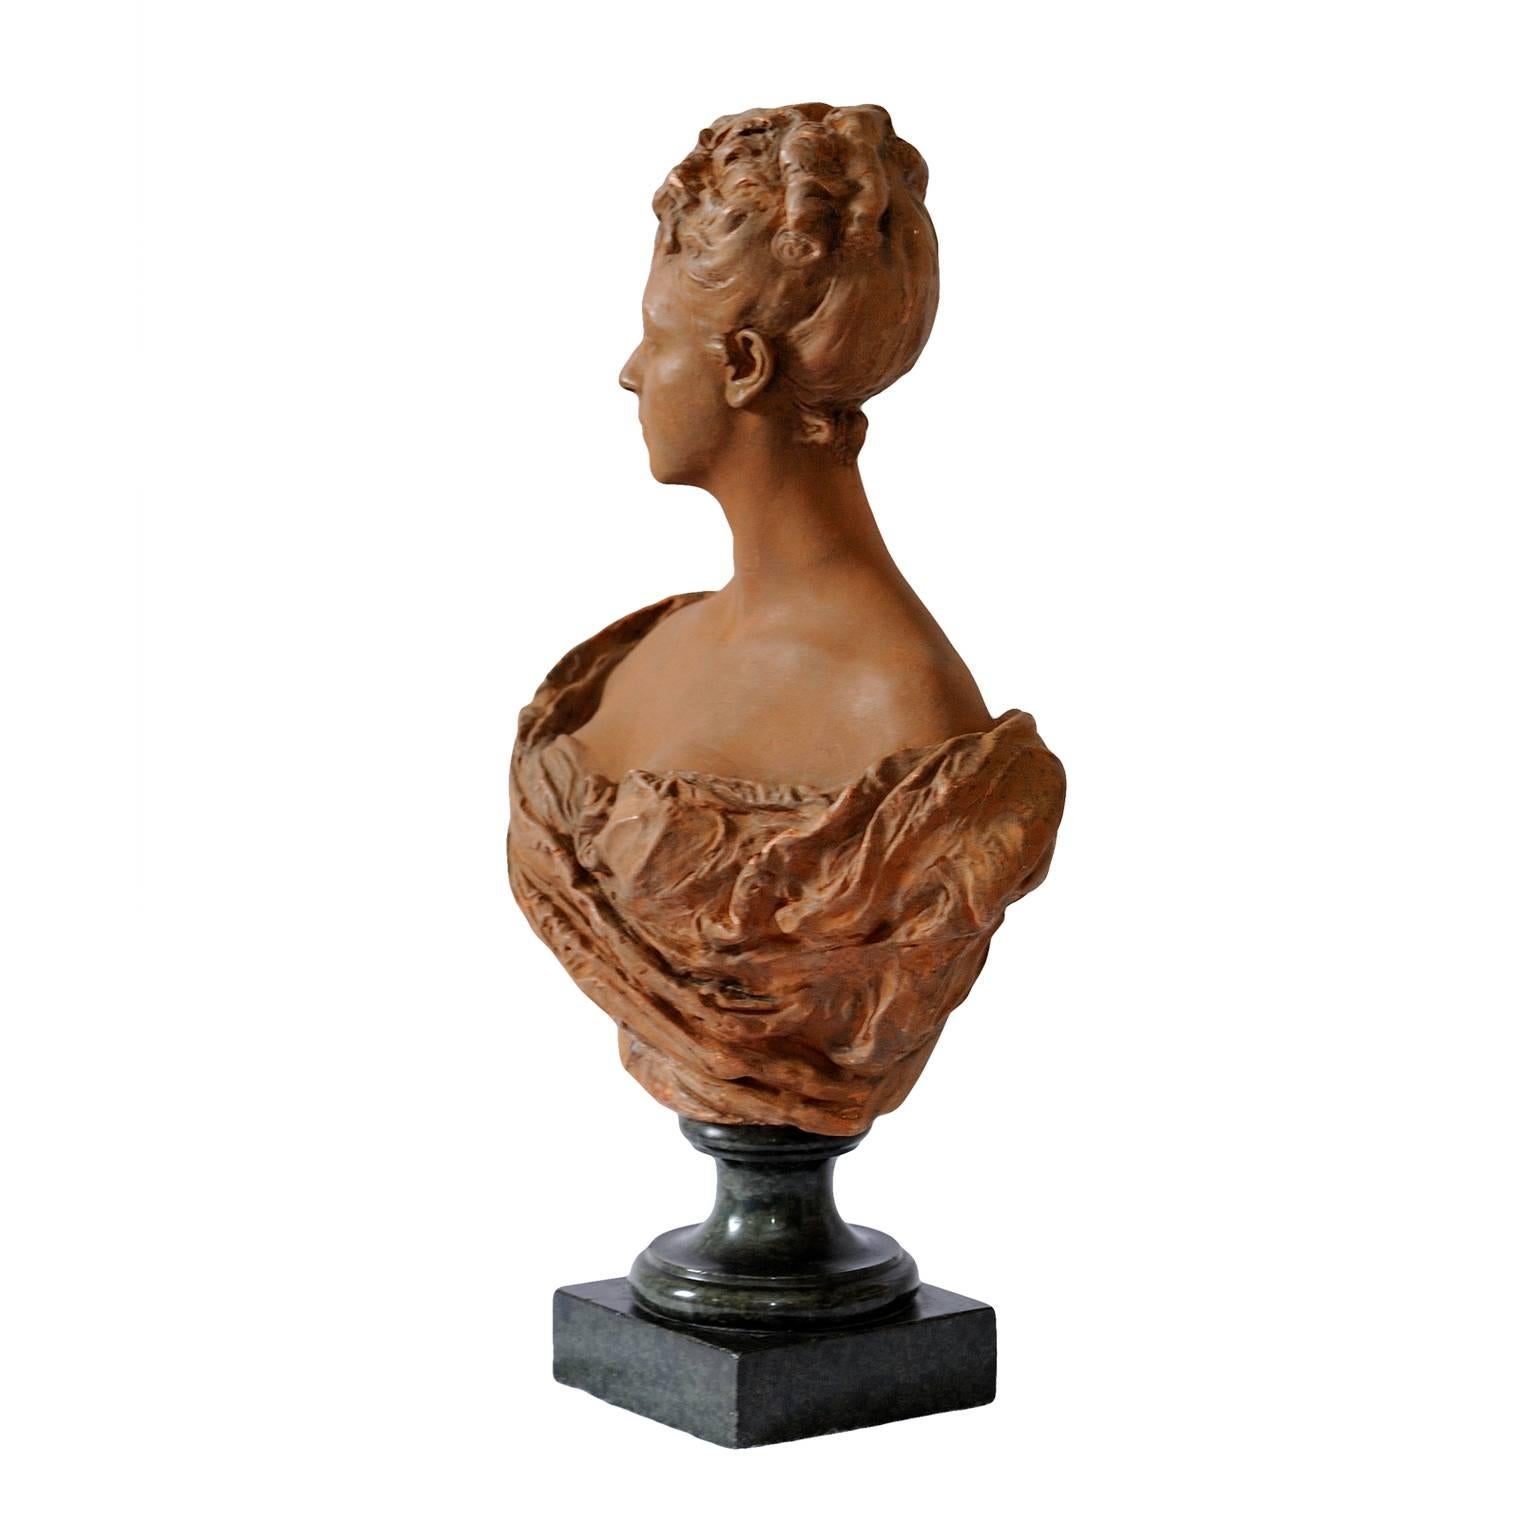 Polished Fine French Terracotta Bust of a Young 18th Century Noble Woman, circa 1860 For Sale